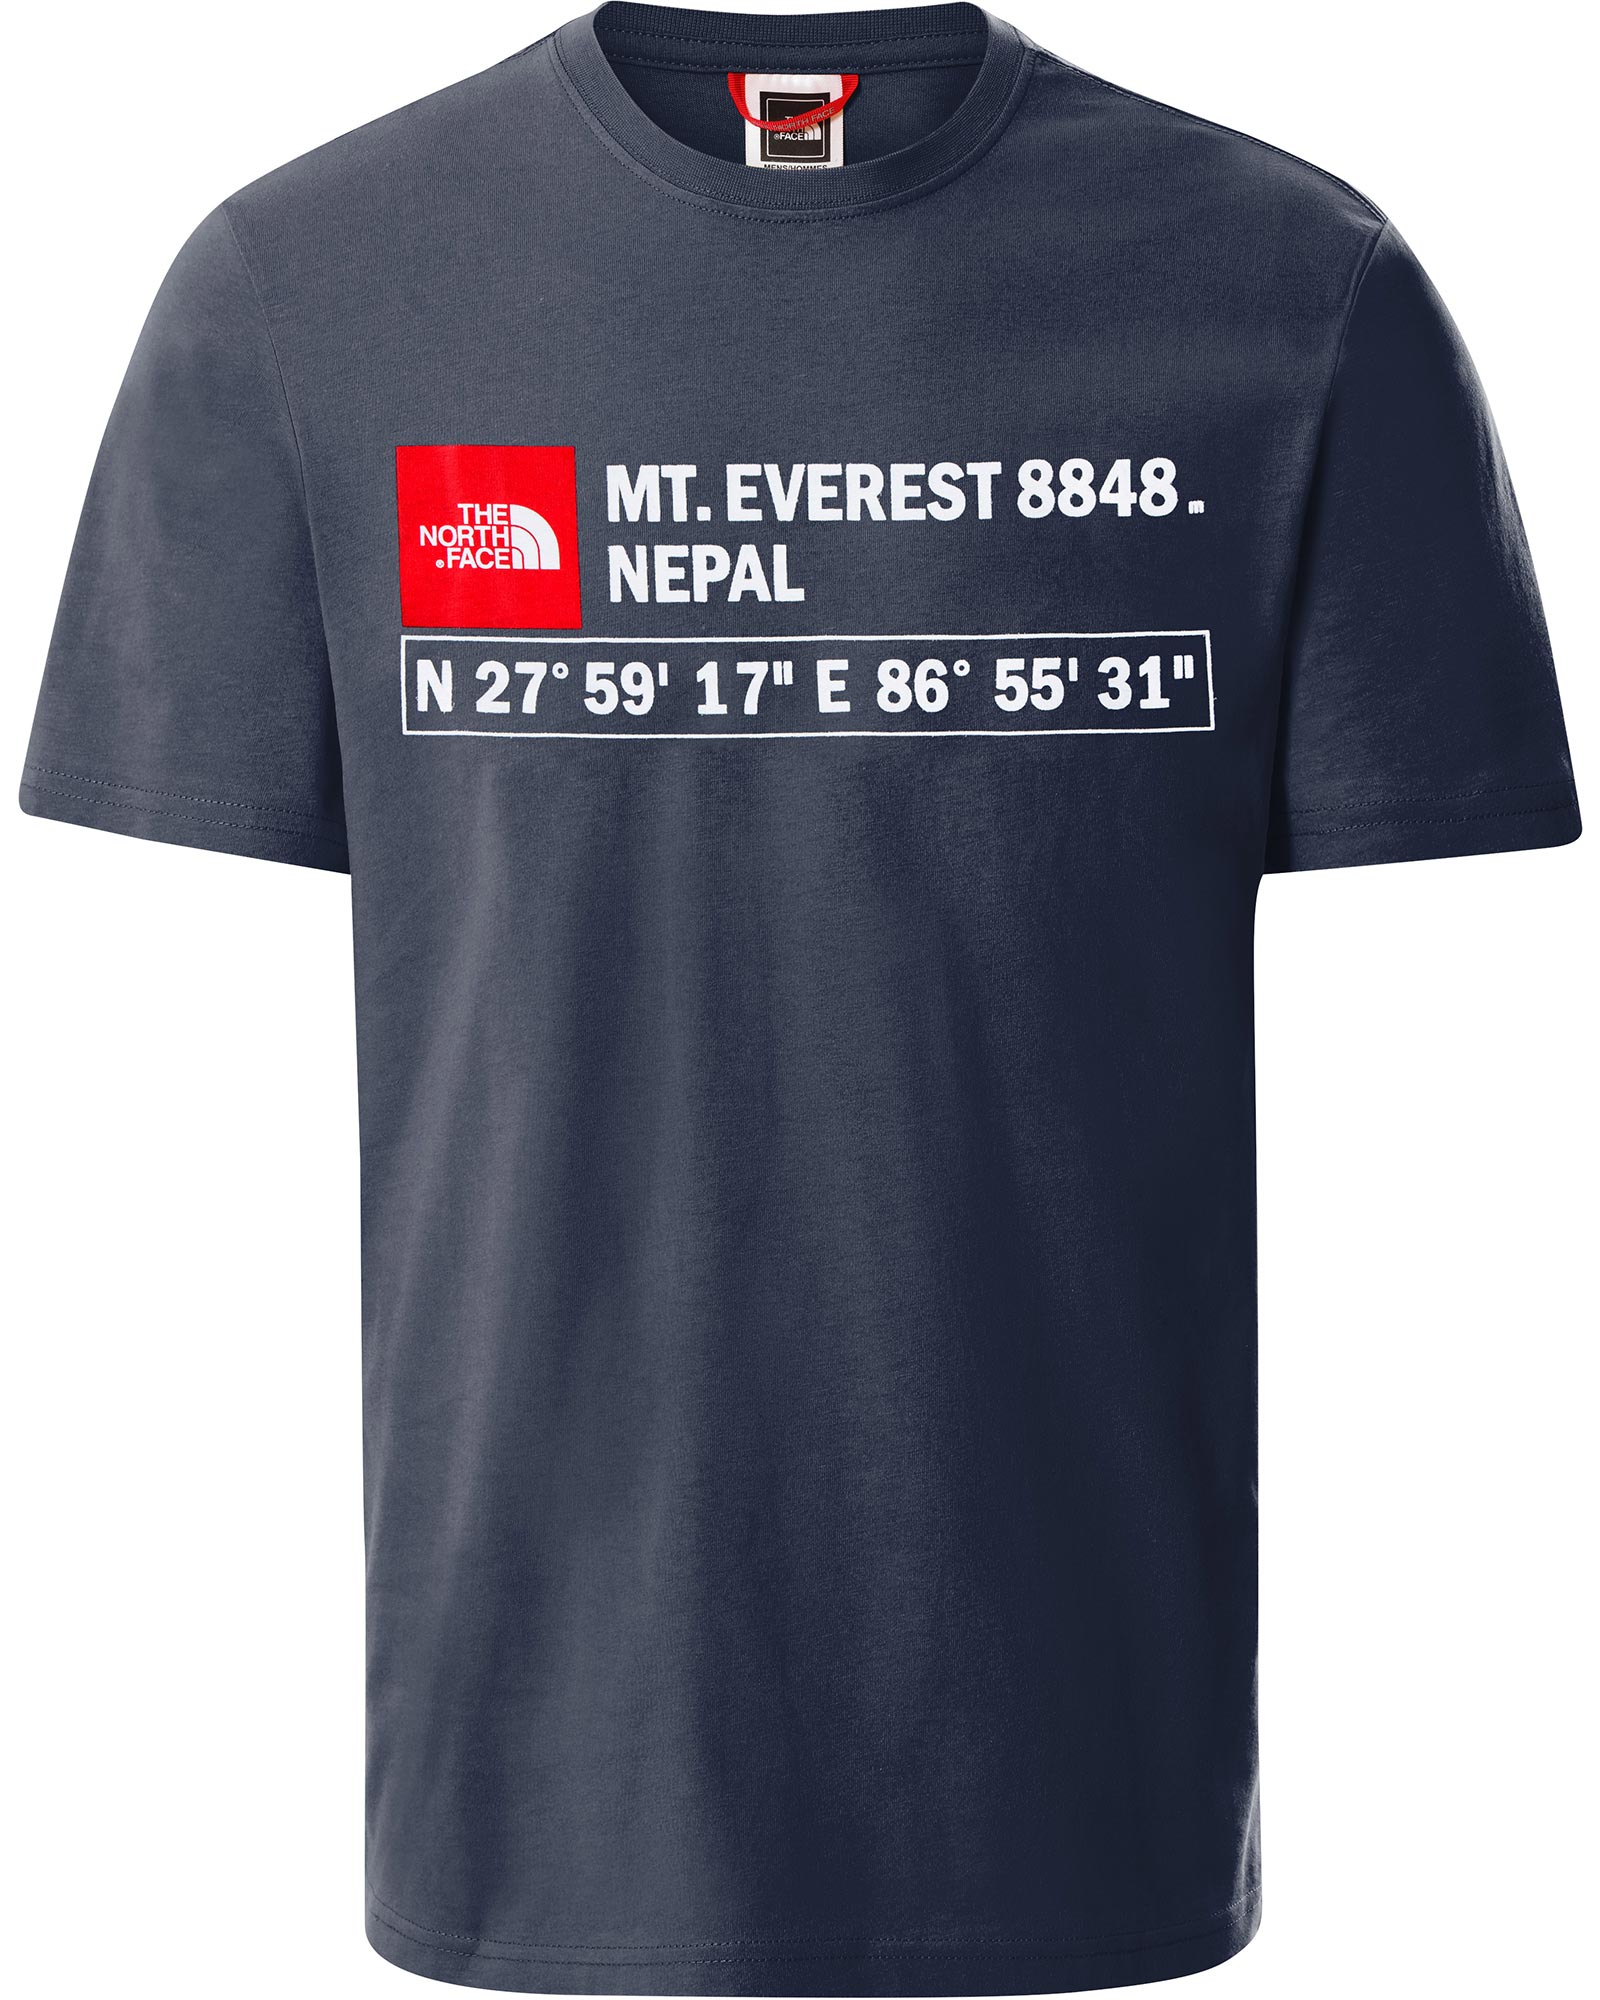 Product image of The North Face Mt everest GPS Logo Men's T-Shirt